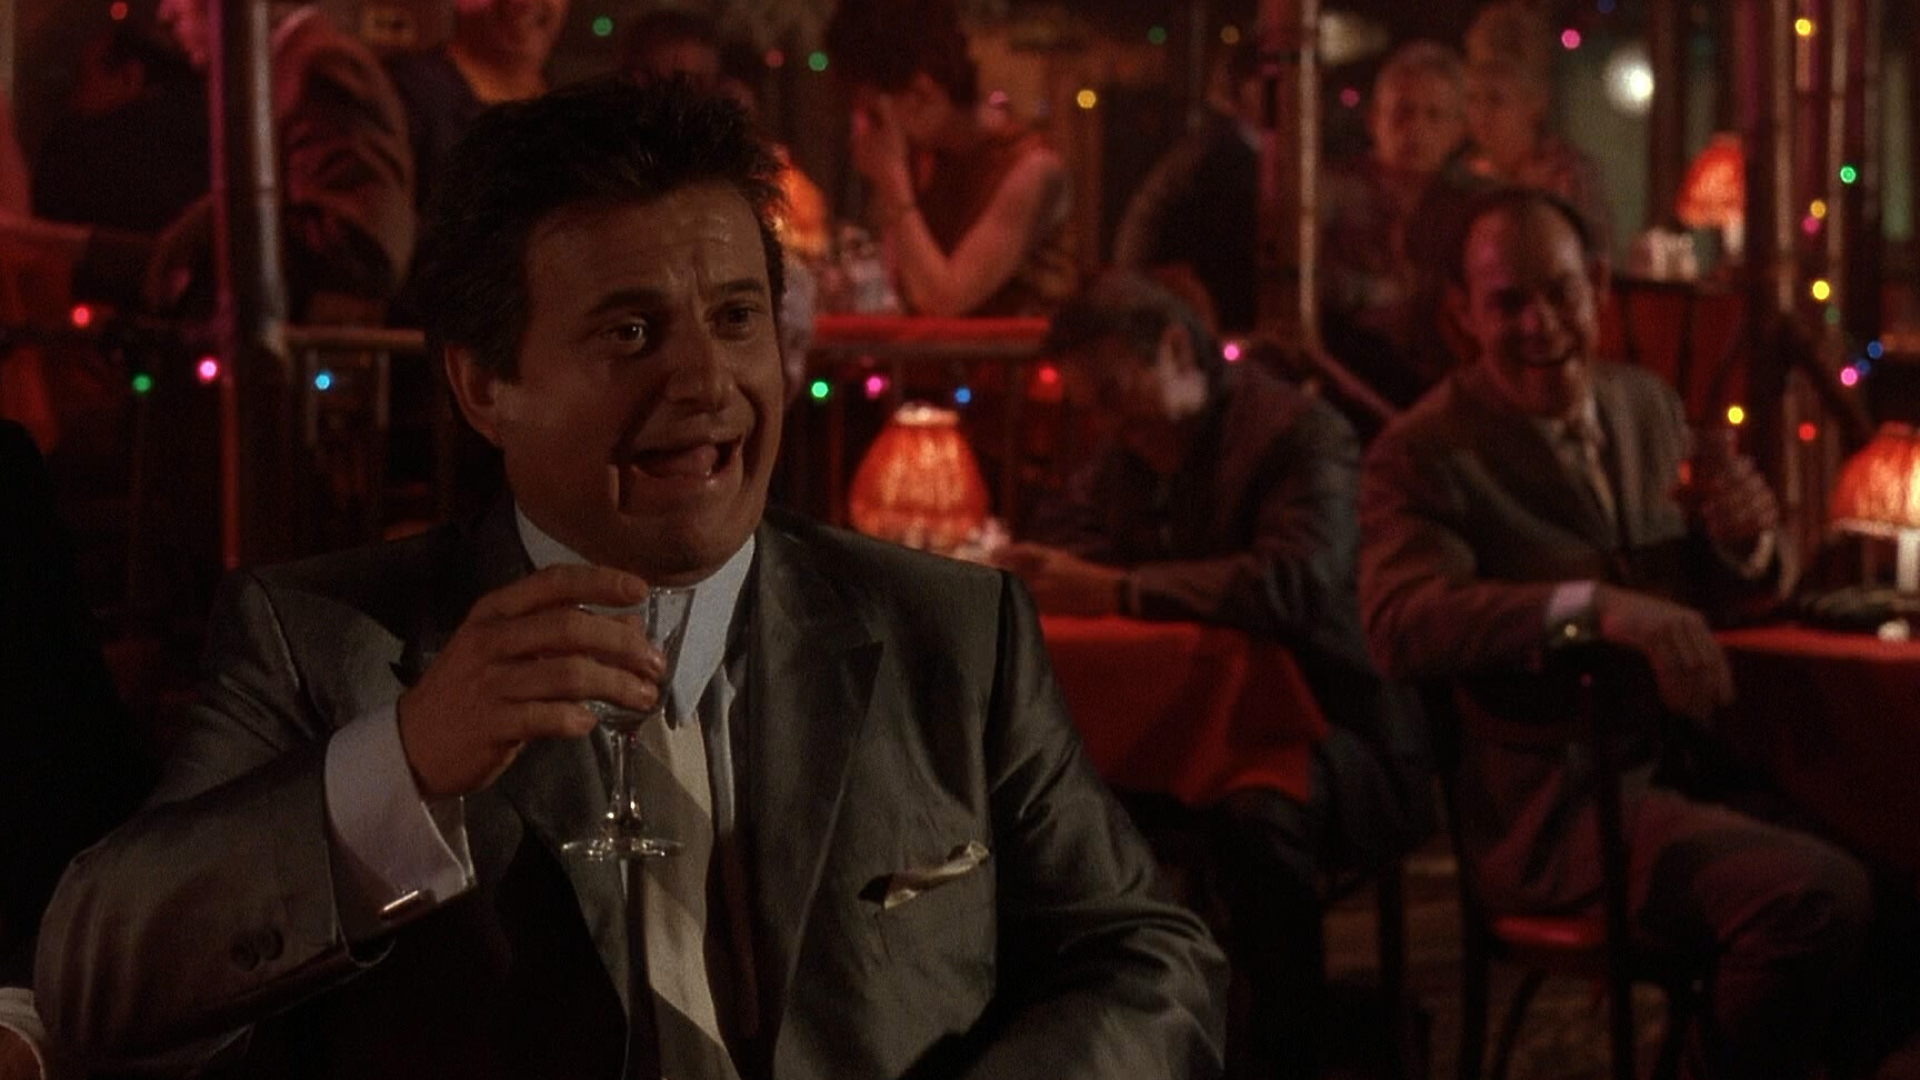 Goodfellas: Joe Pesci as Tommy DeVito, Scorsese was awarded with Silver Lion for Best Director. 1920x1080 Full HD Wallpaper.